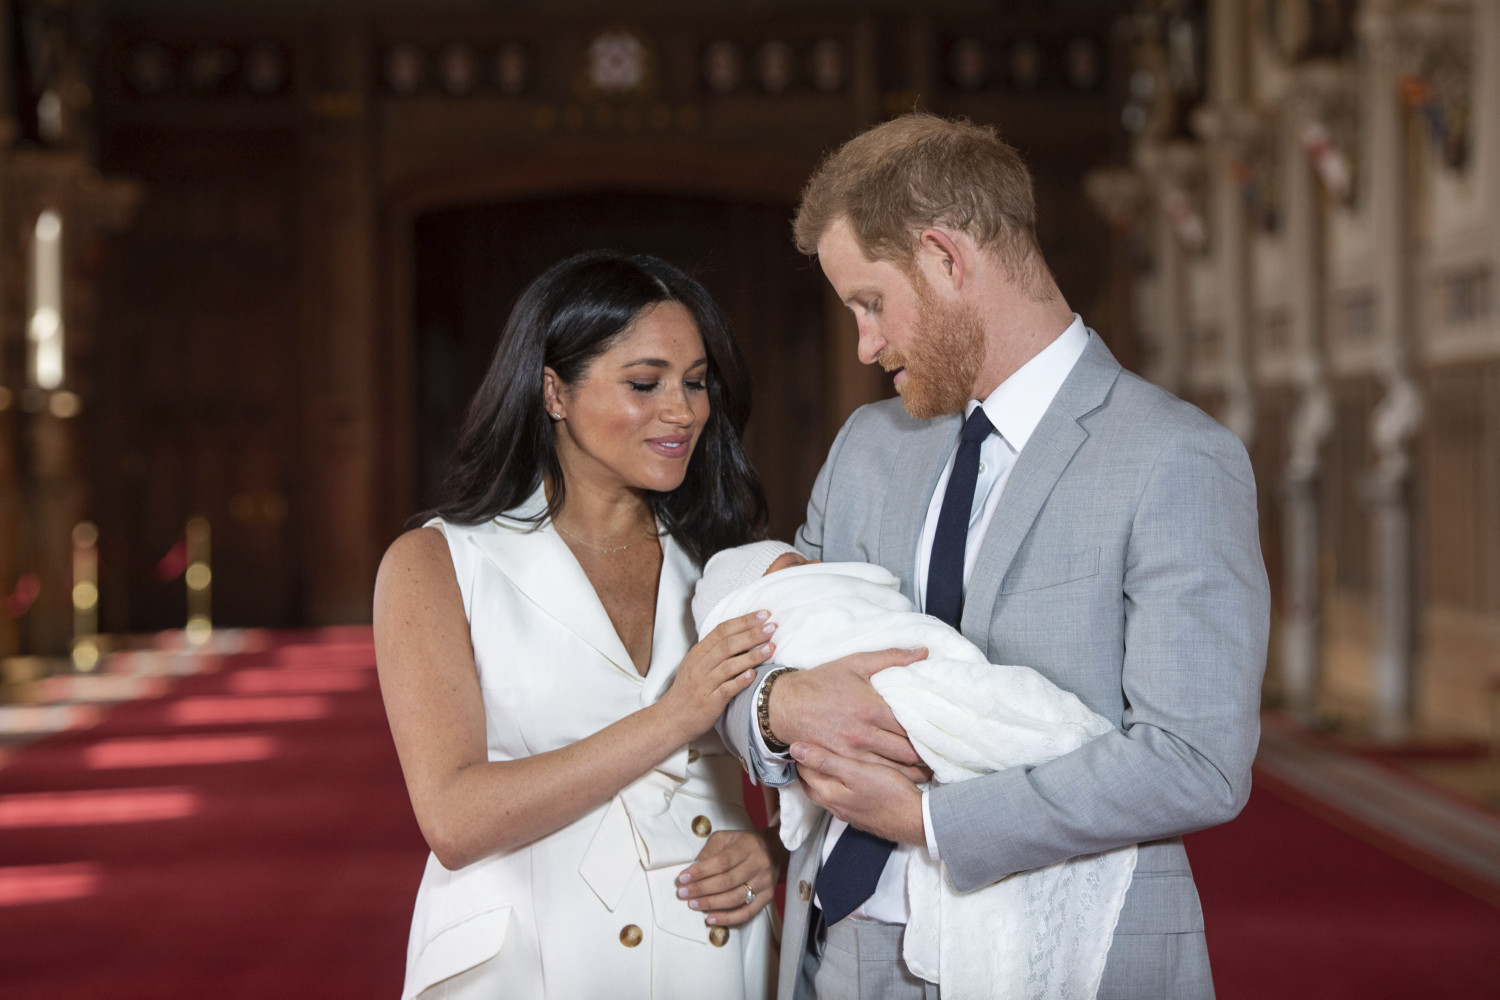 Meghan Markle and Prince Harry hold newborn baby Archie